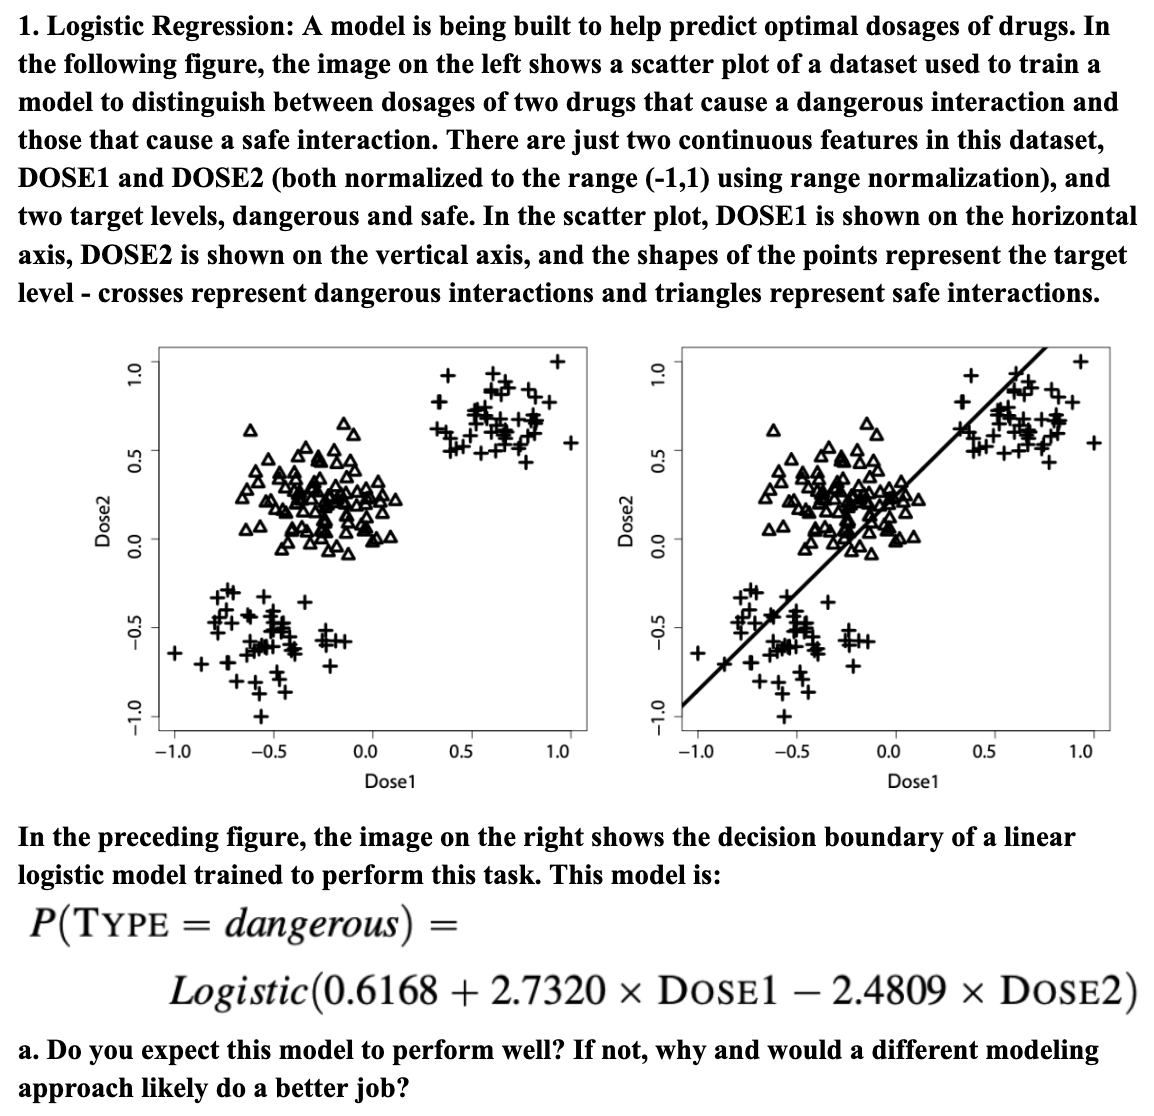 1. Logistic Regression: A model is being built to help predict optimal dosages of drugs. In the following